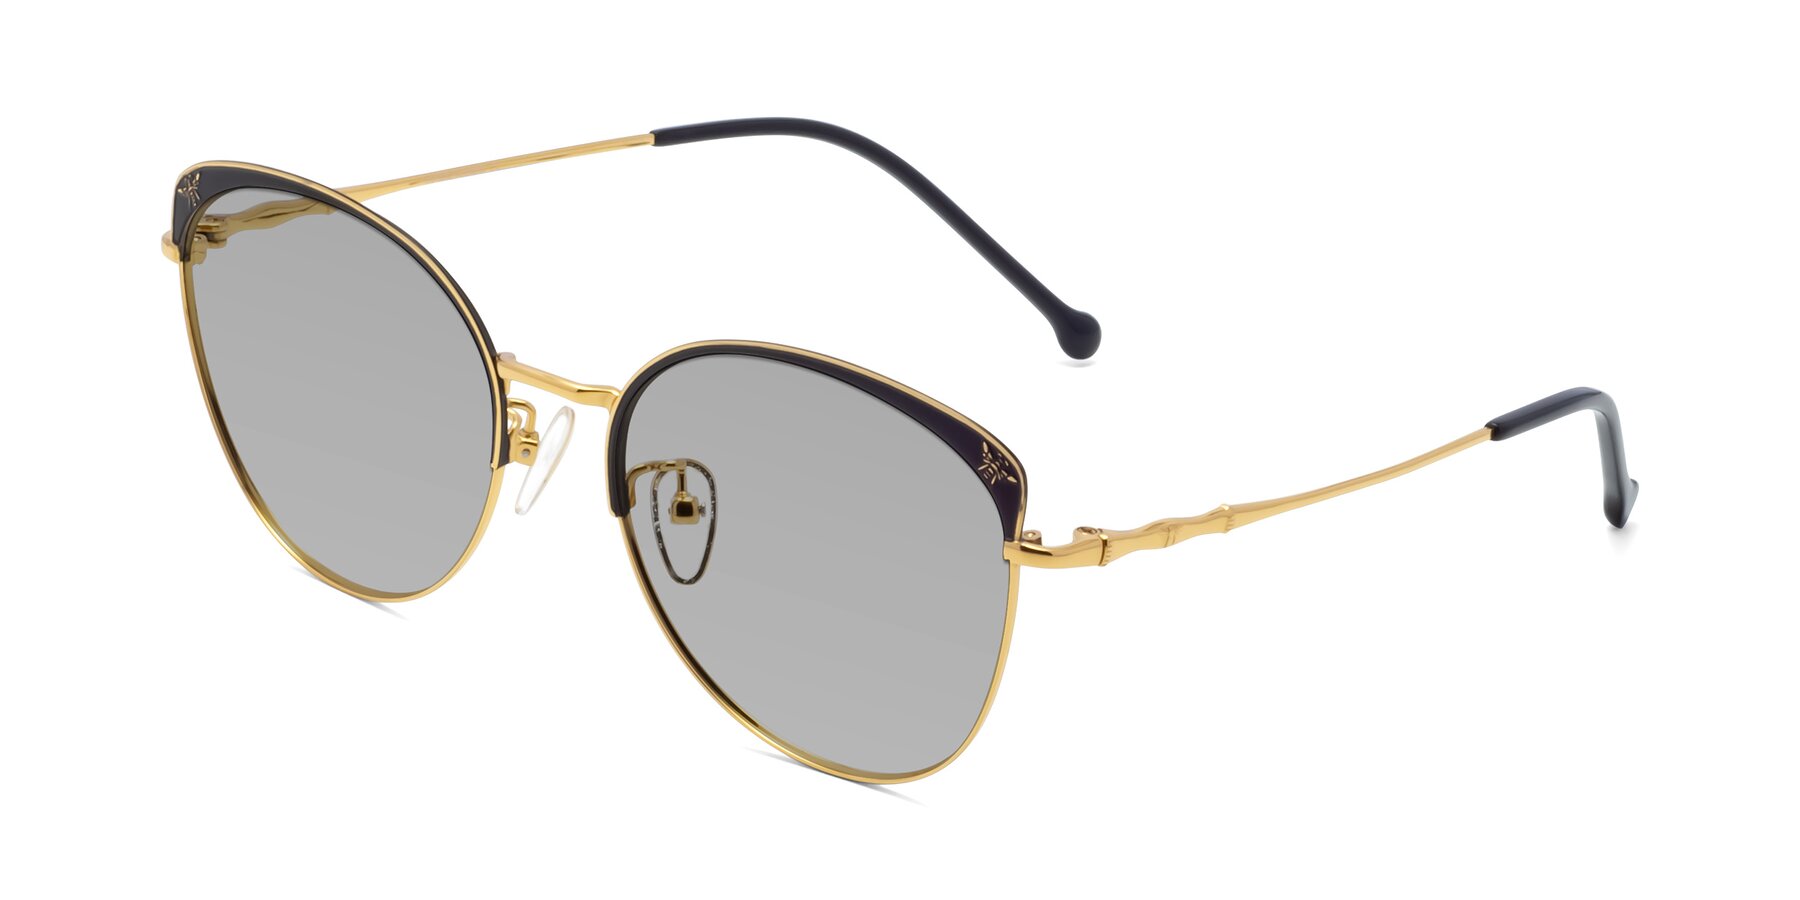 Angle of 18019 in Black-Gold with Light Gray Tinted Lenses